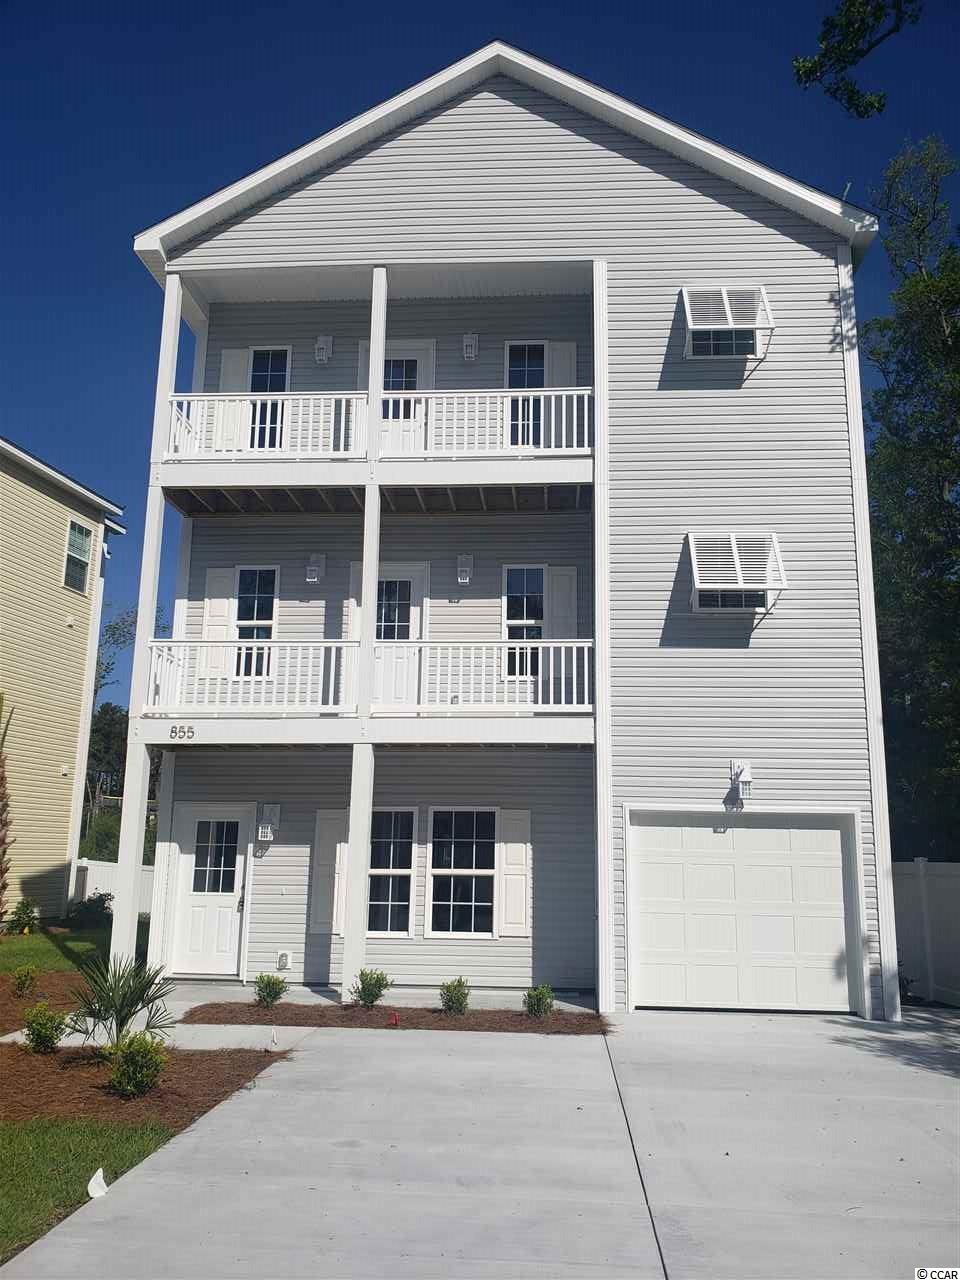 855 9th Ave. S North Myrtle Beach, SC 29582